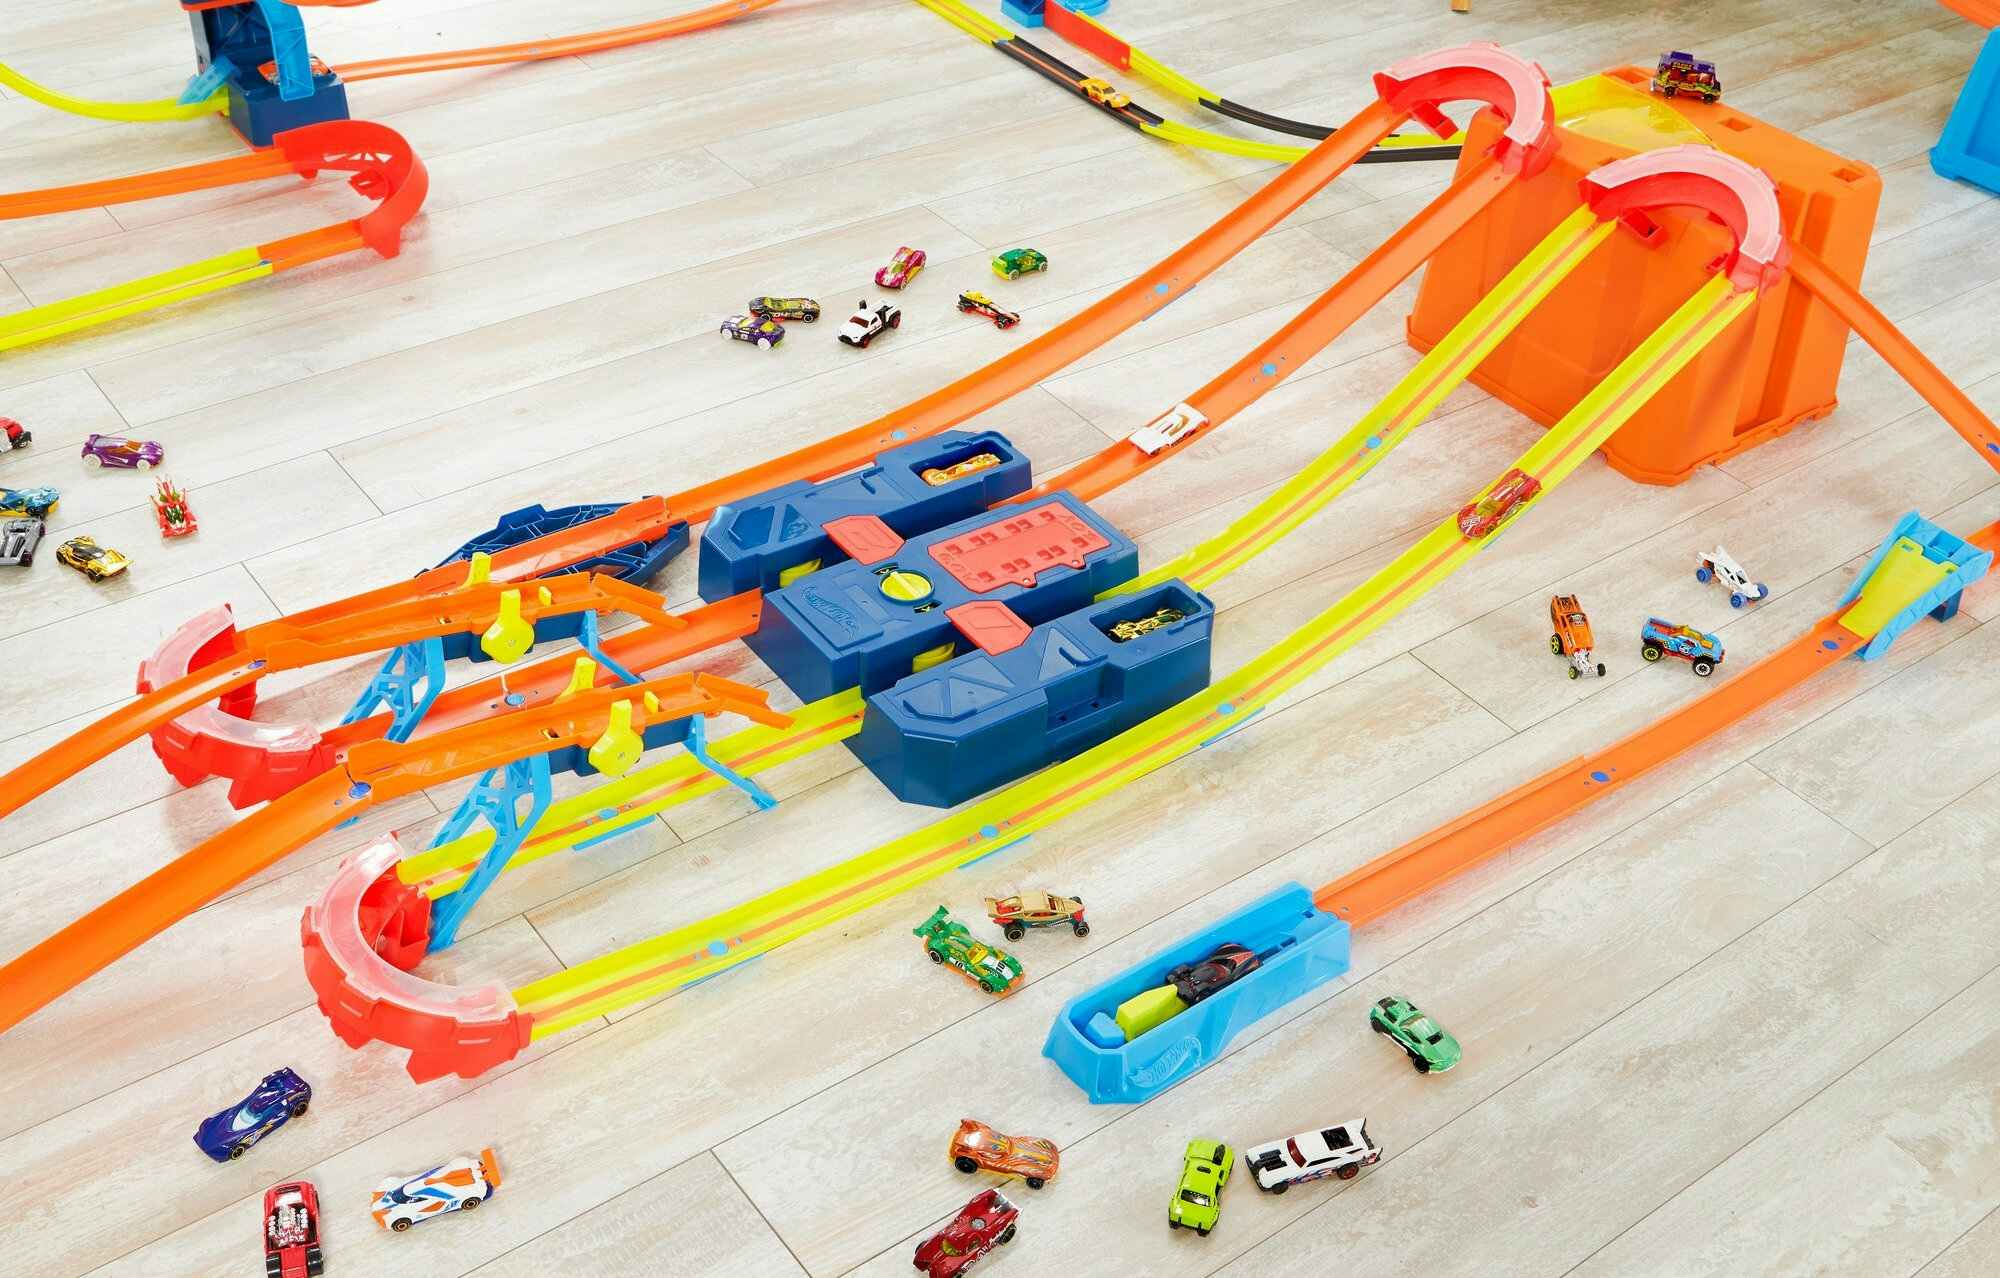 hotwheels track set set out on the floor